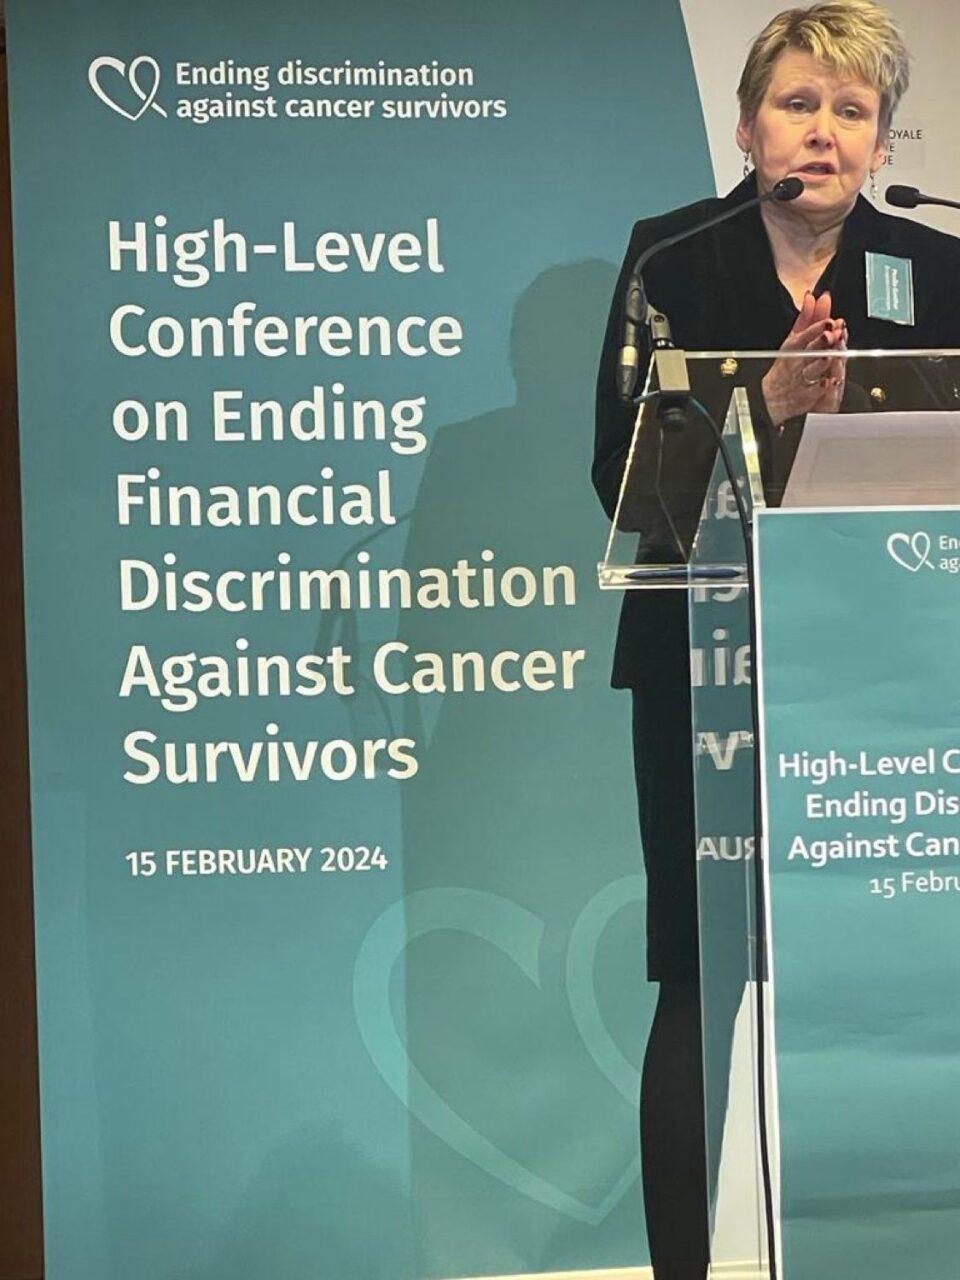 Penilla Gunther: A very interesting day in Brussels about ending financial discrimination against Cancer Survivors